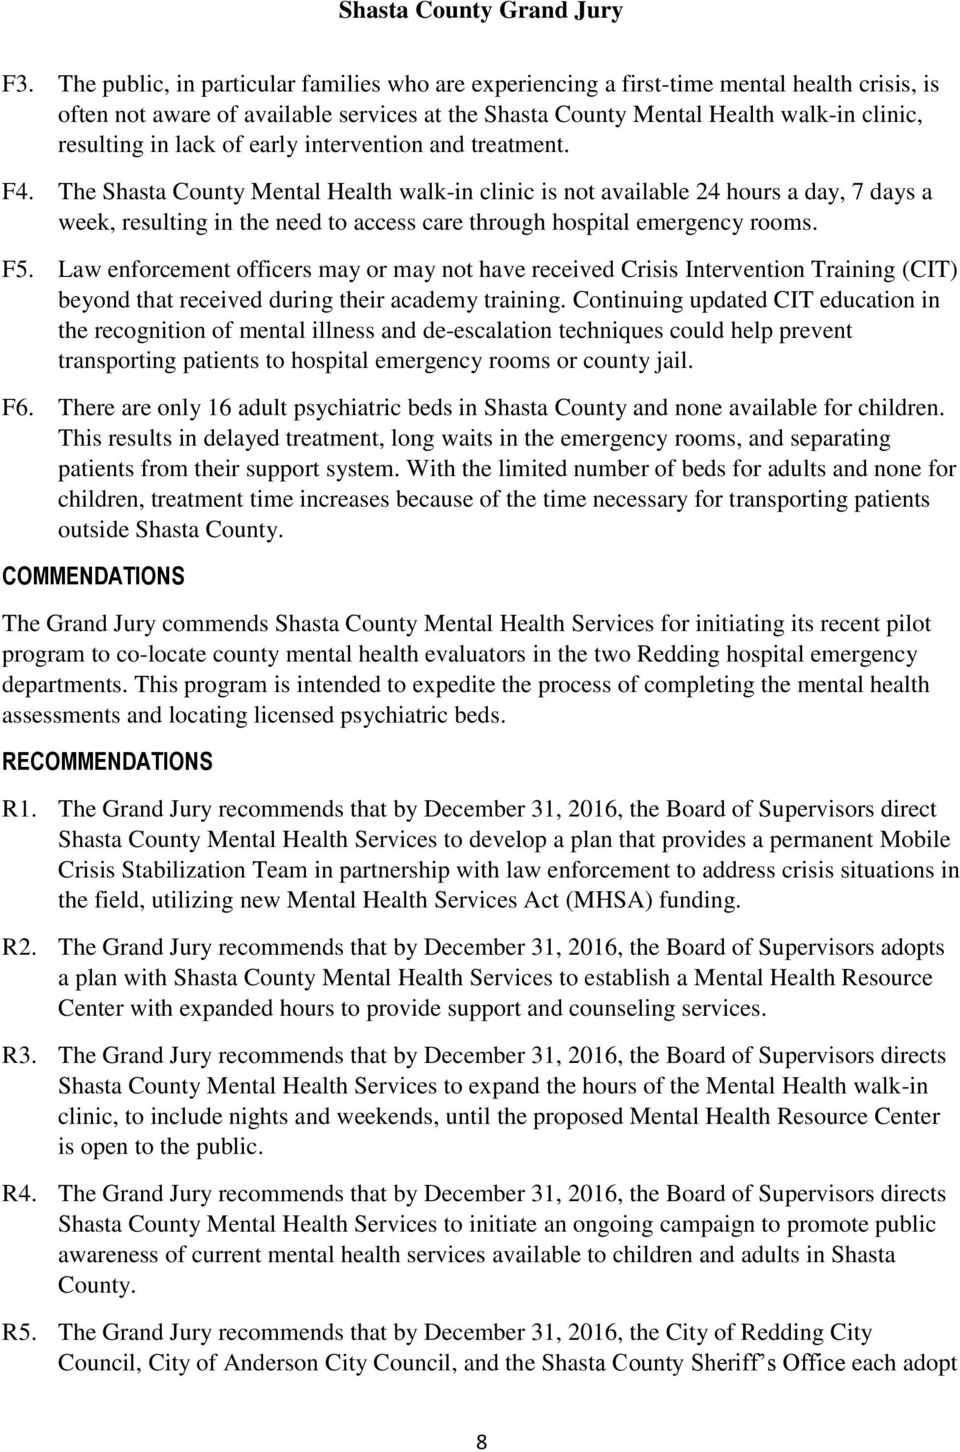 The Shasta County Mental Health walk-in clinic is not available 24 hours a day, 7 days a week, resulting in the need to access care through hospital emergency rooms. F5.